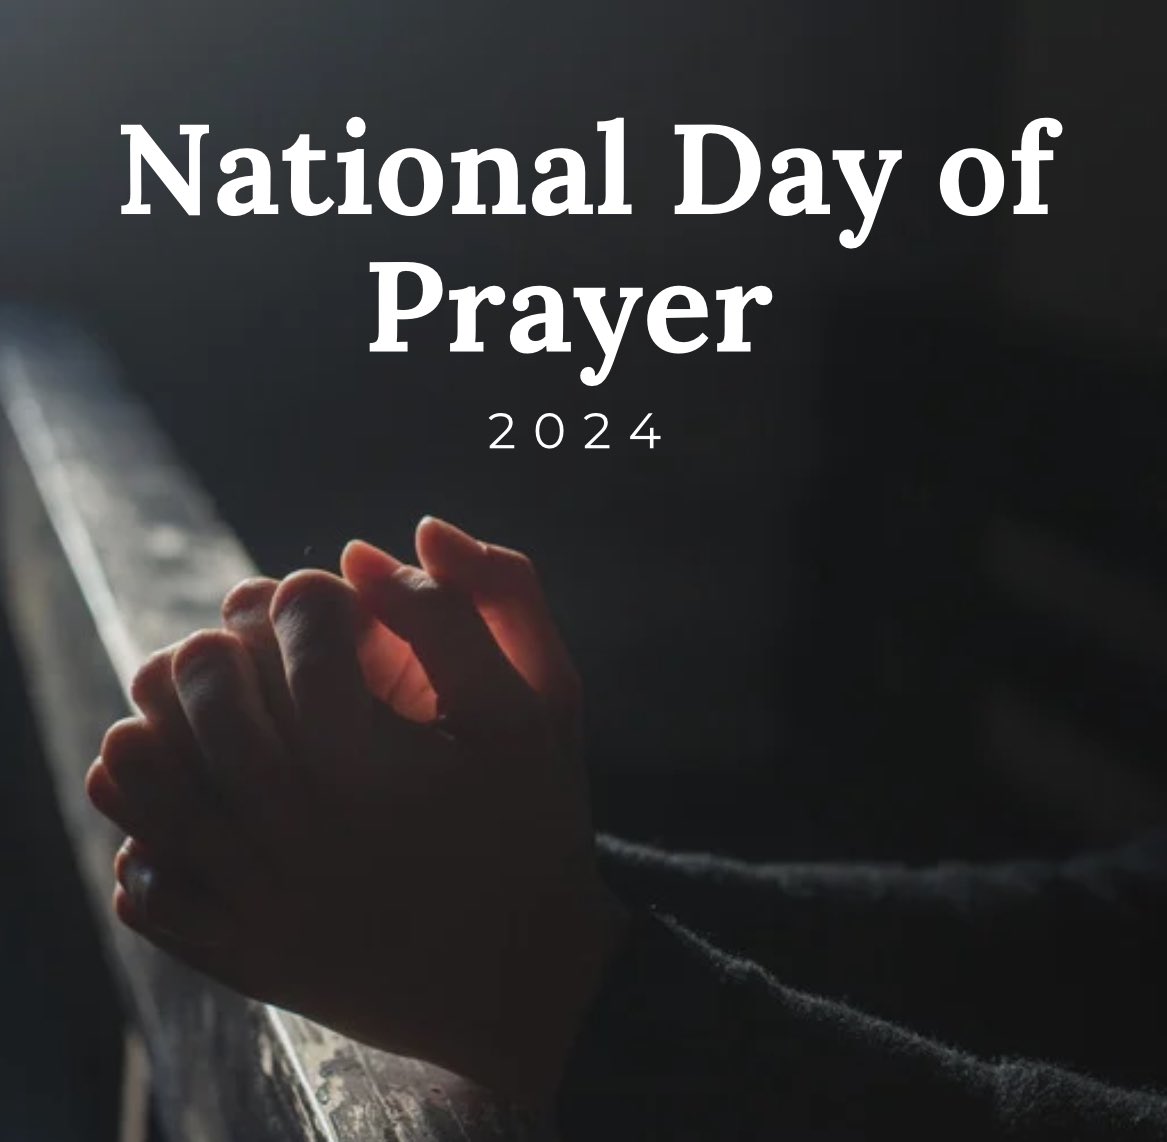 On this National Day of Prayer, we unite as one nation under God to express gratitude for His grace and blessings. Through all the turmoil of this world, He is faithful and good. 'Do not be anxious about anything, but in everything, by prayer and petition, with thanksgiving,